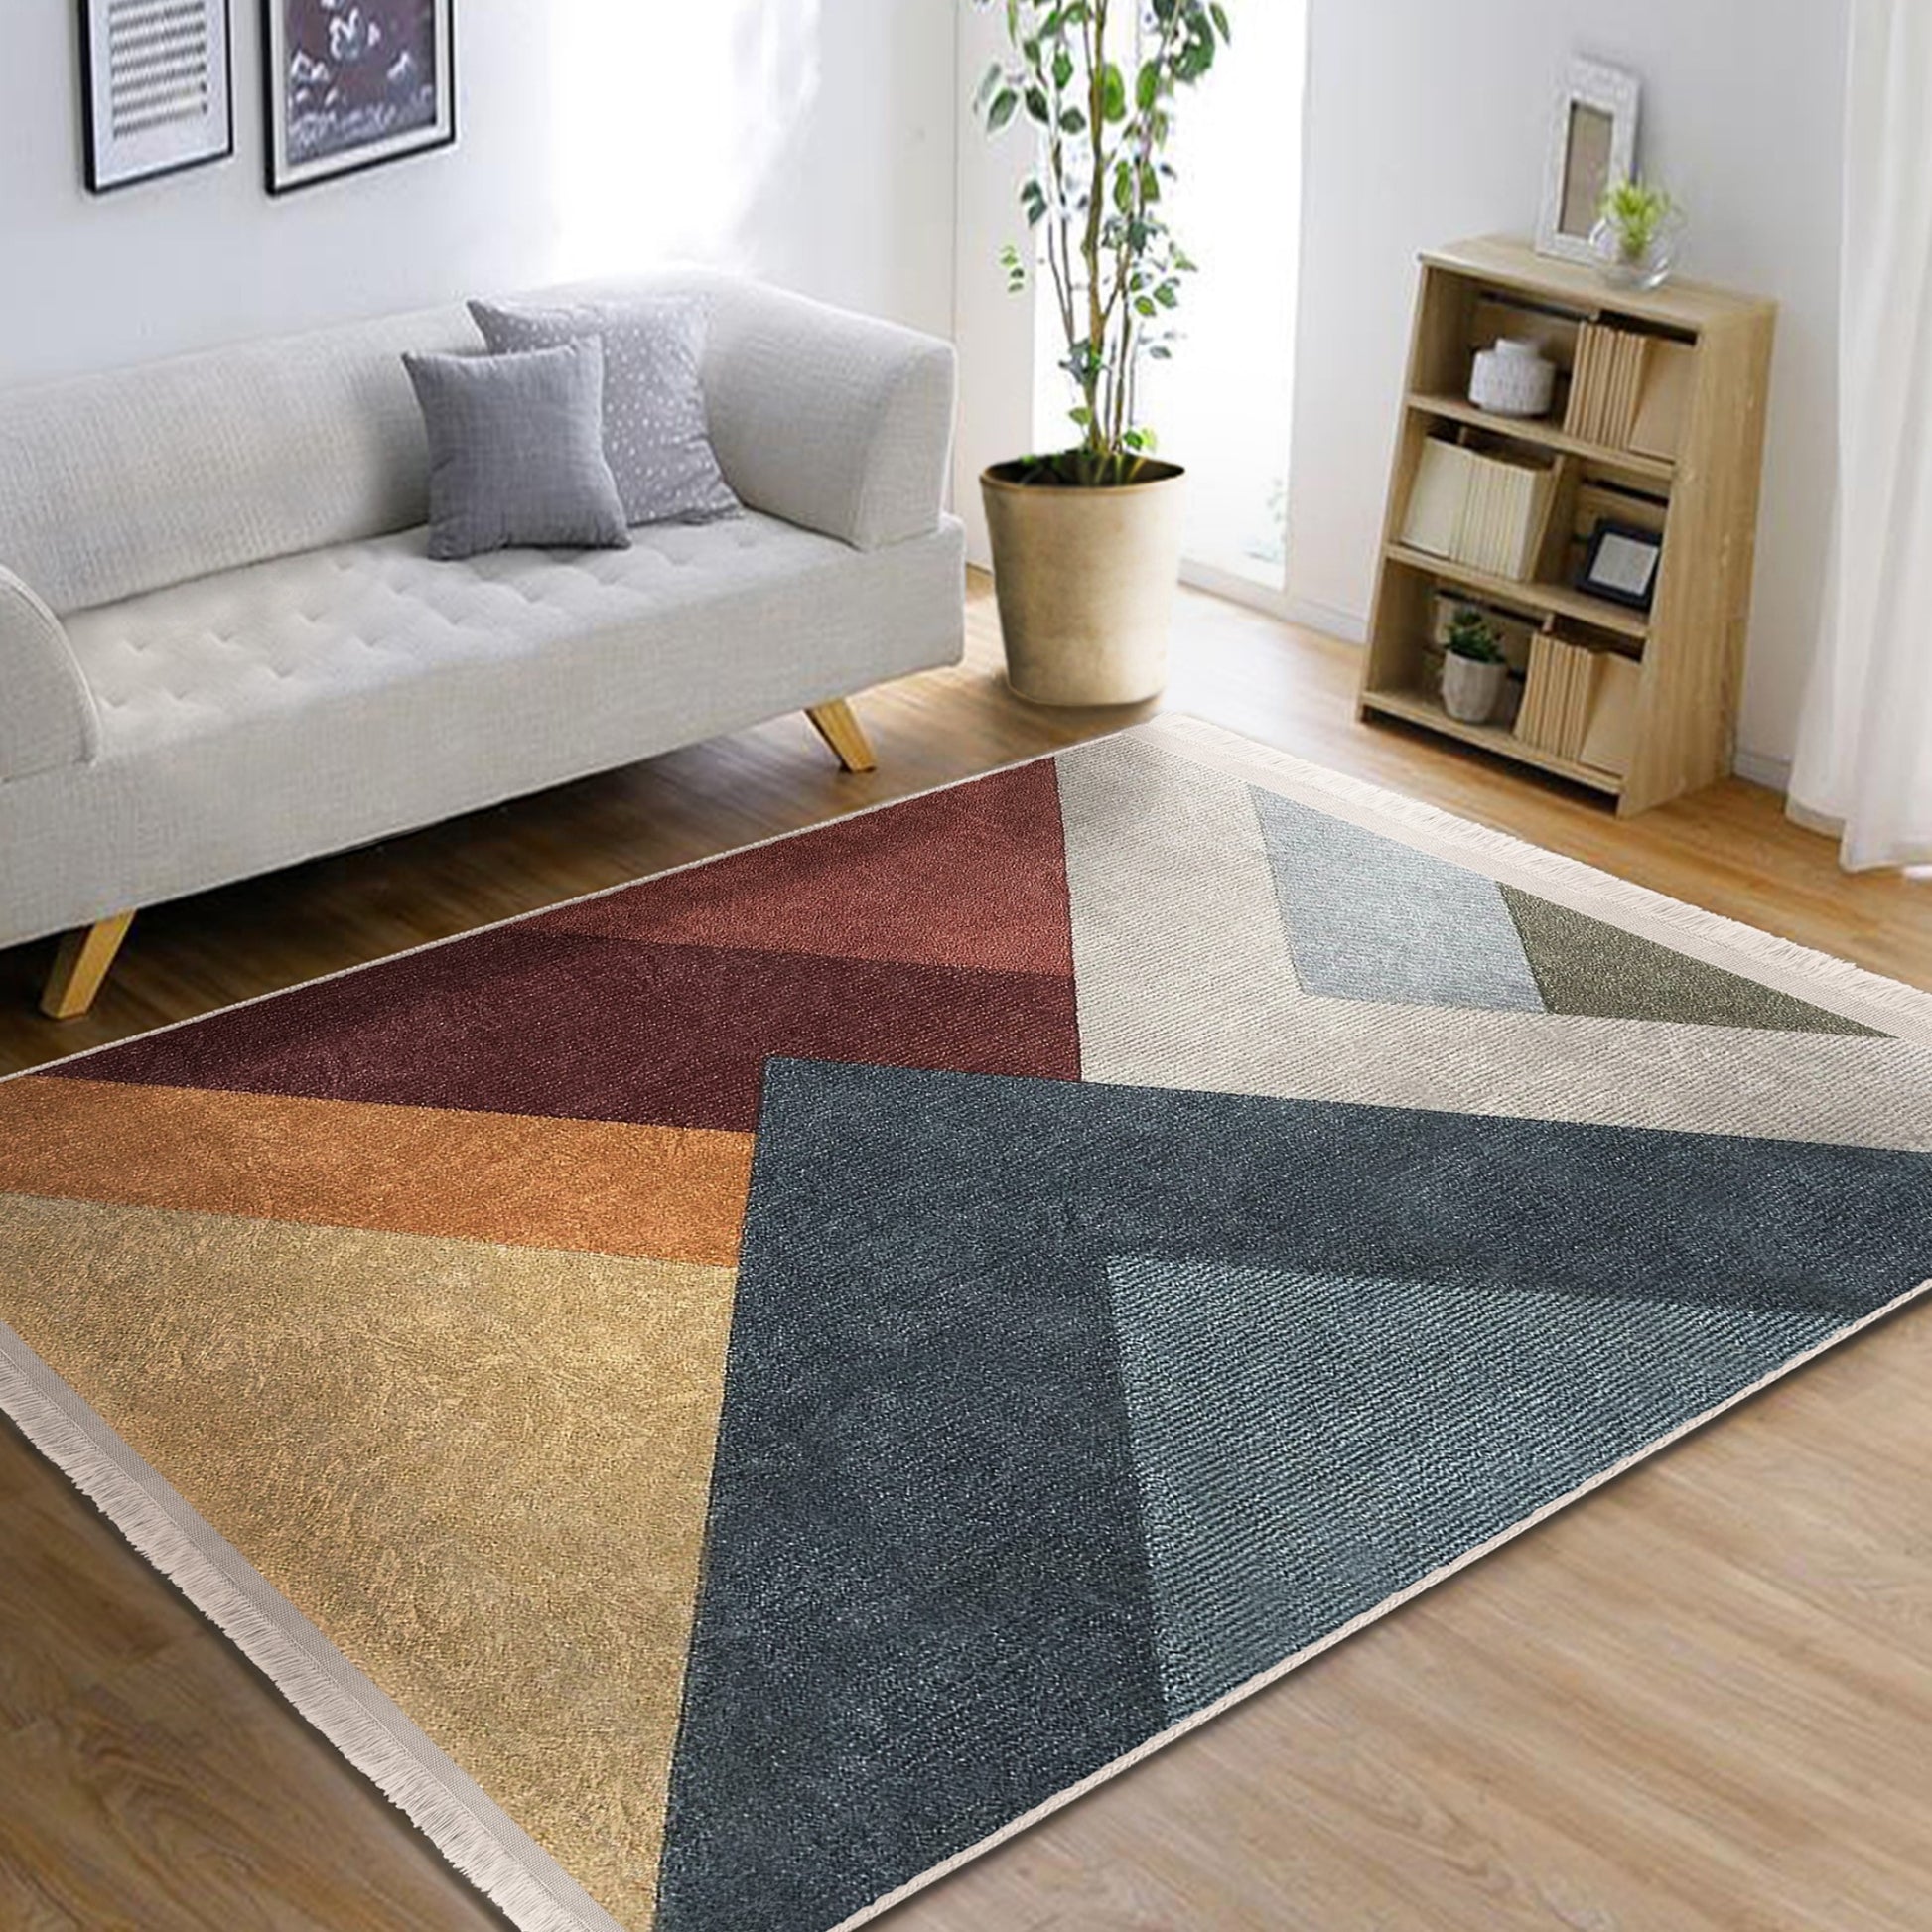 Functional and Stylish Area Rug with Triangle Craftsmanship